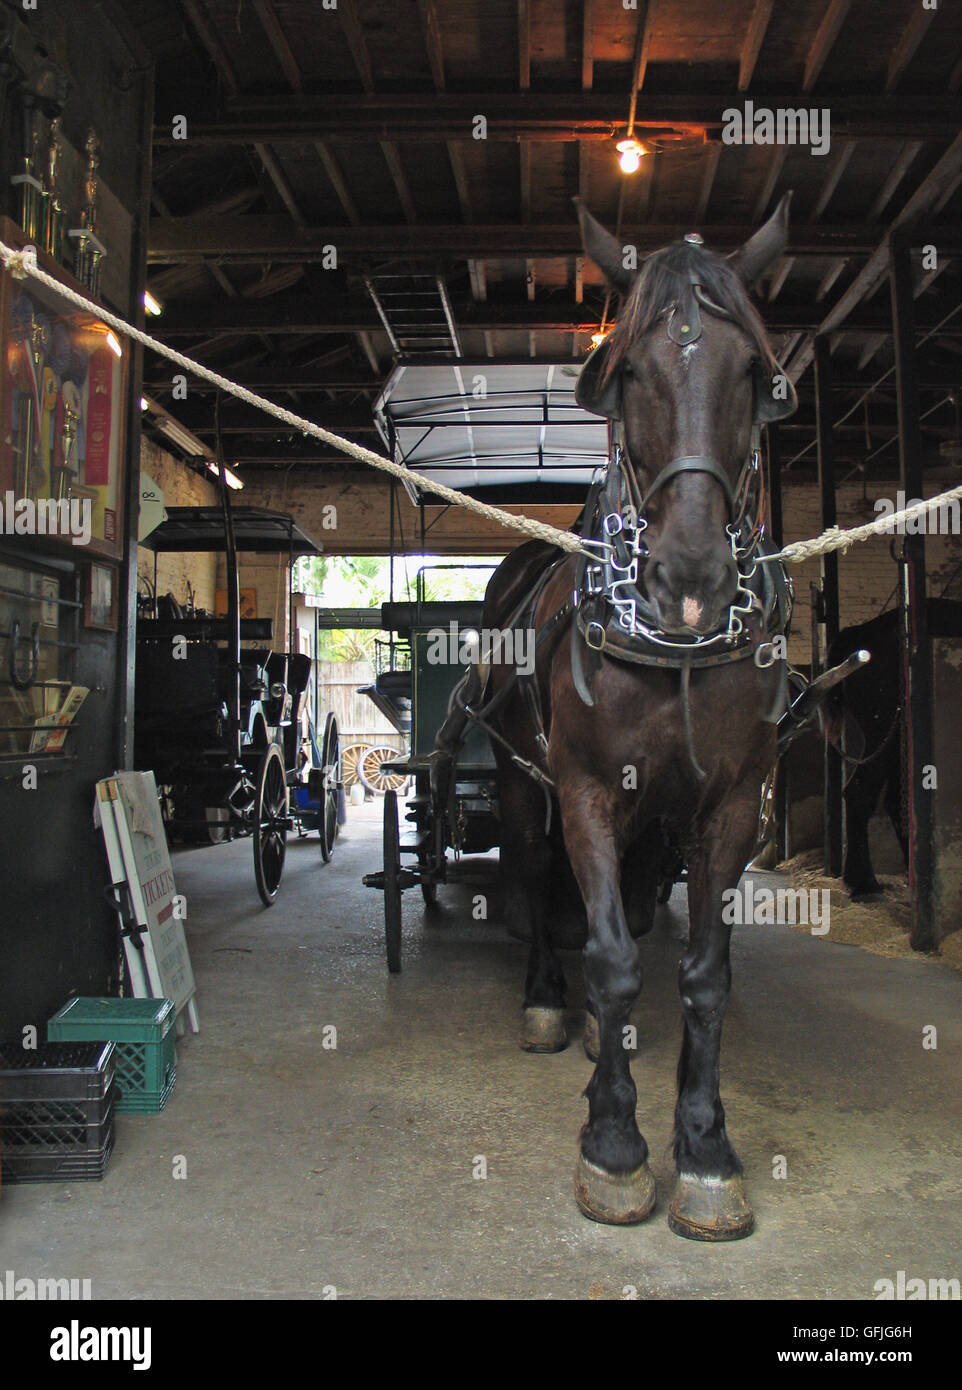 A horse stands ready to lead the way at Classic Carriage Tours in Charleston South Carolina. Stock Photo